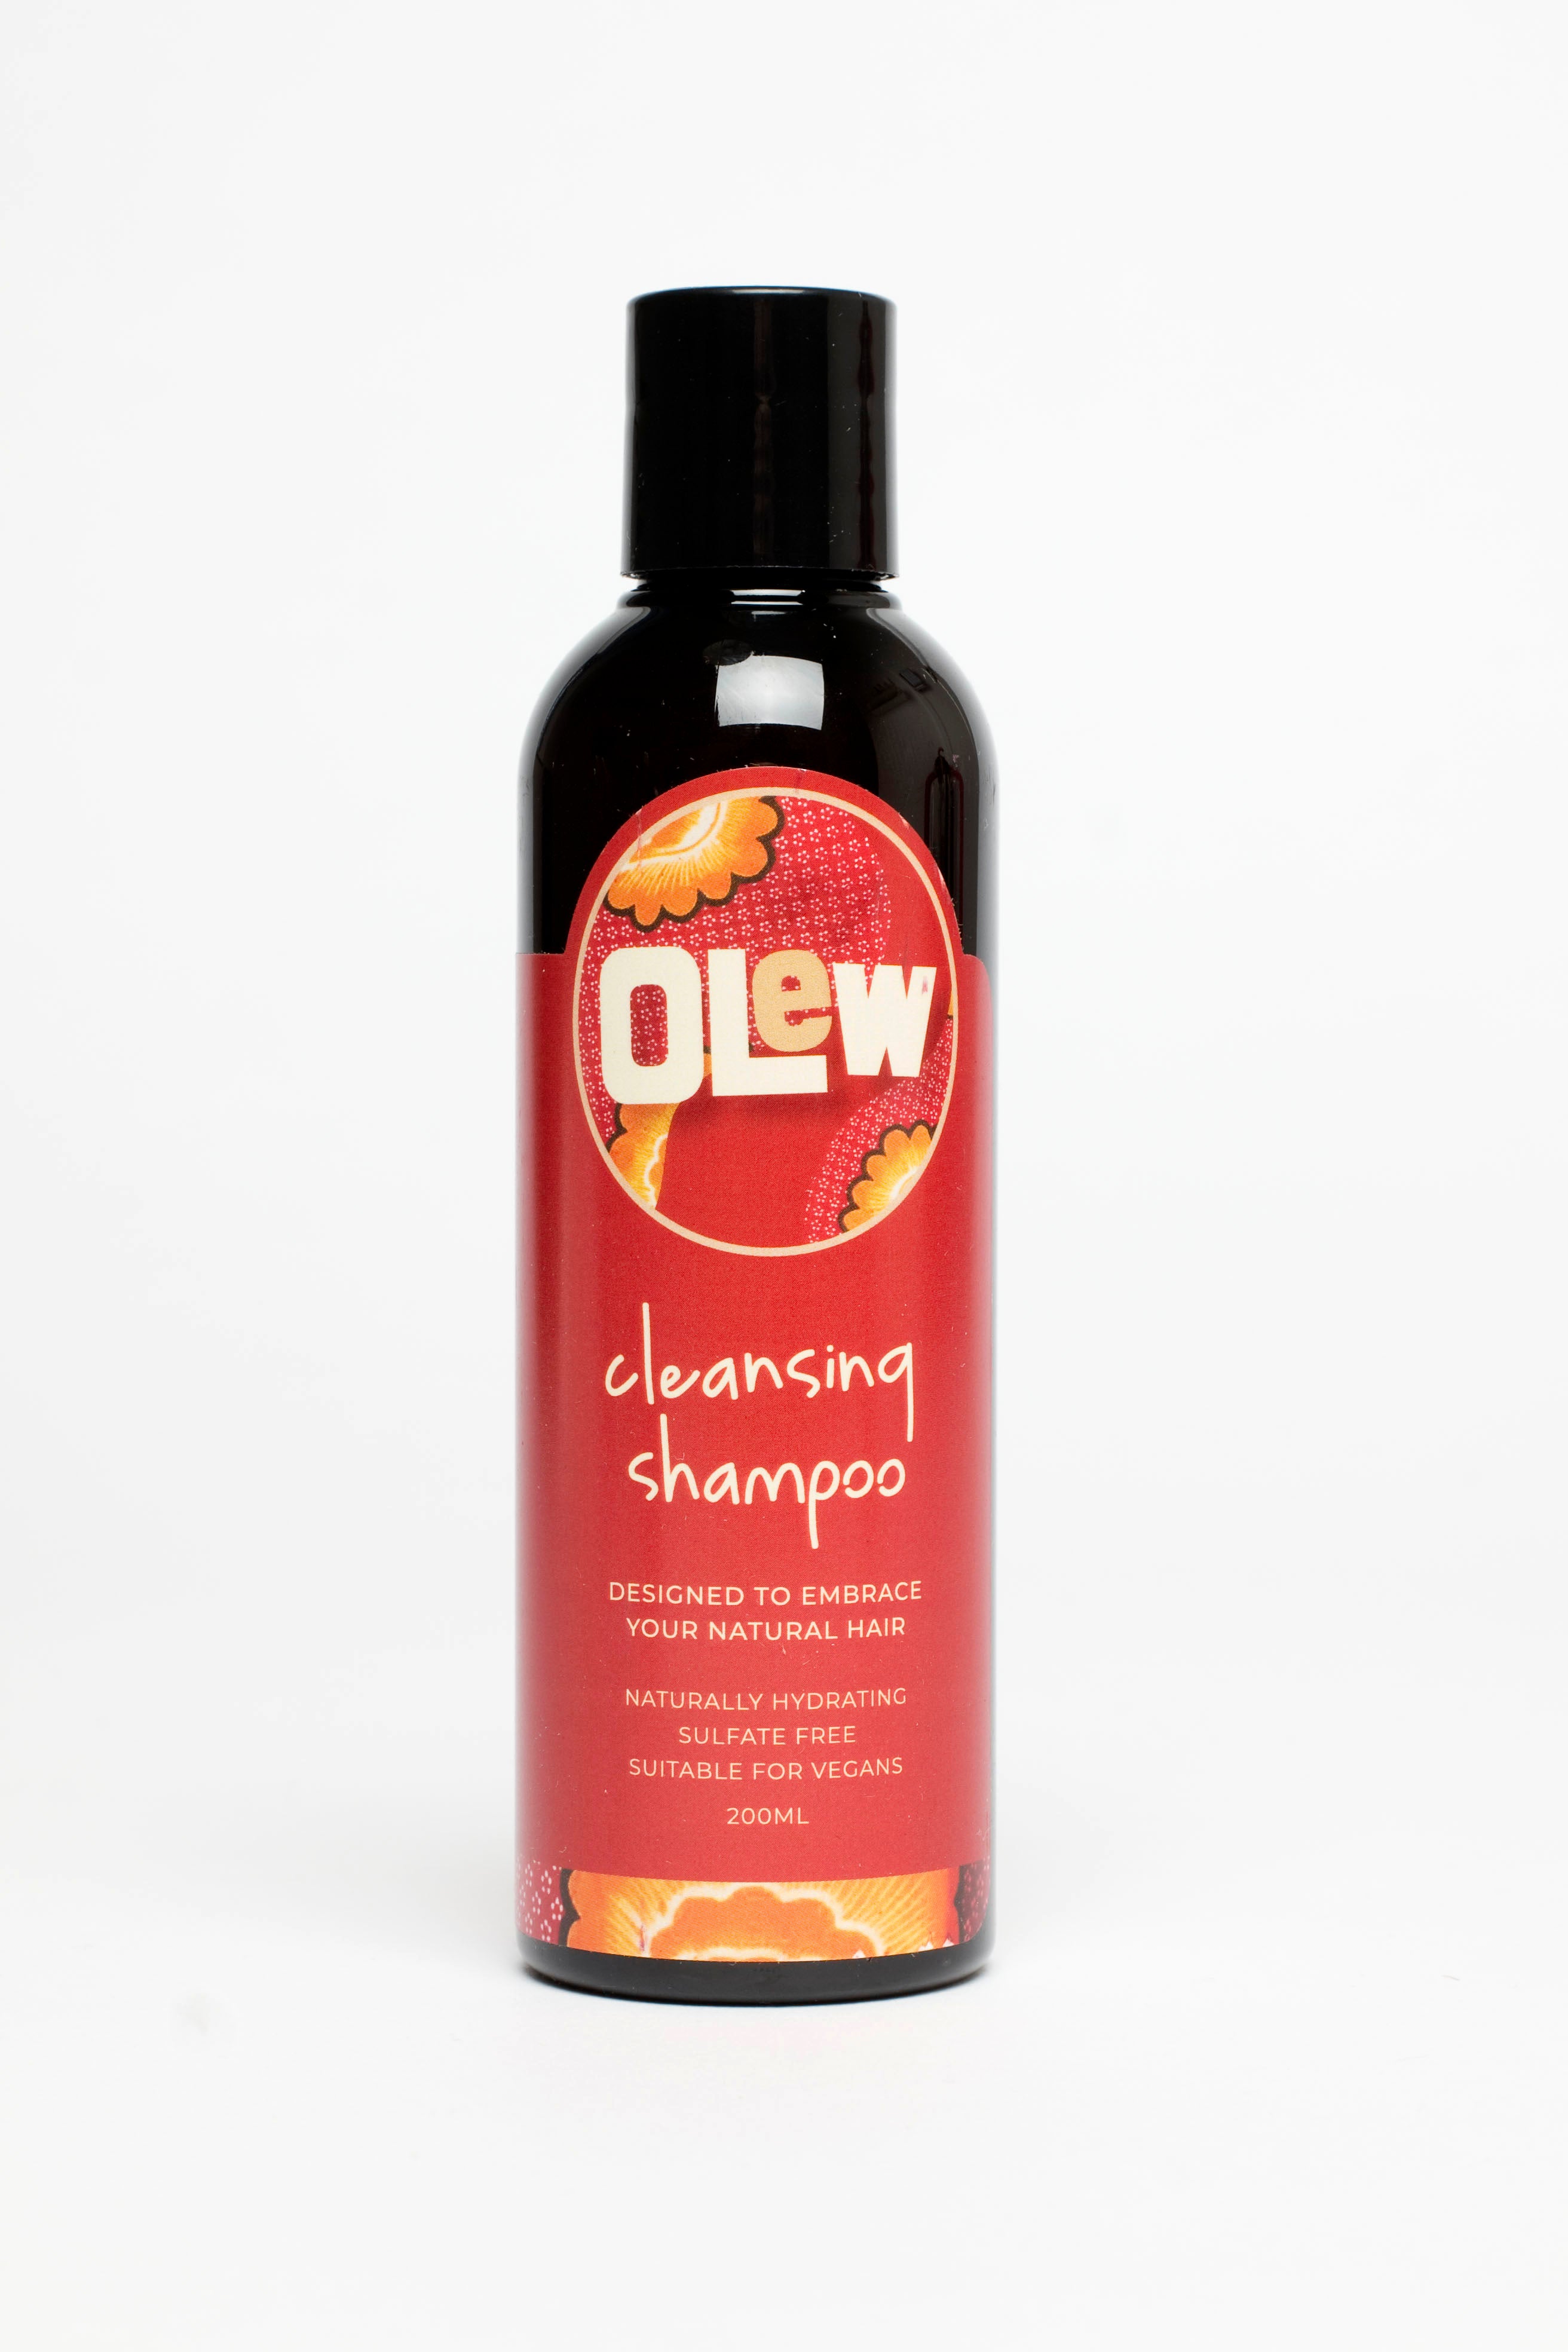 Olew Cleansing Shampoo.